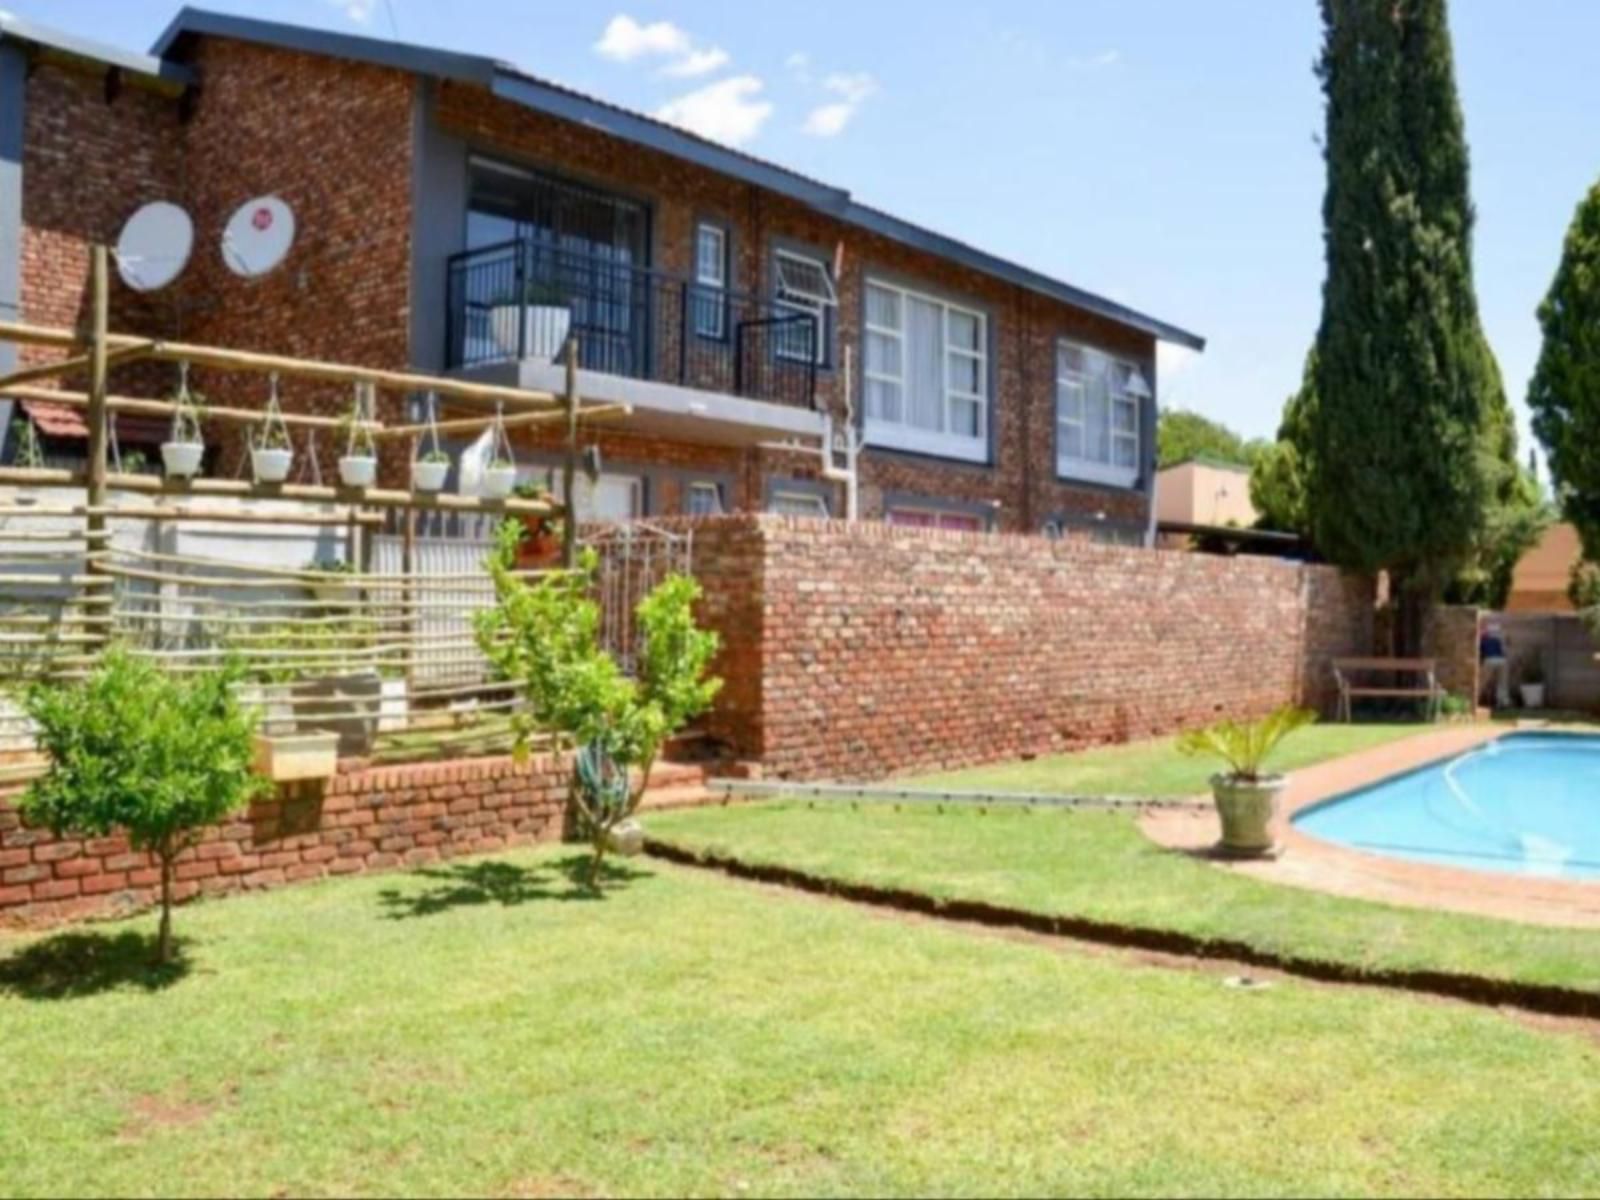 Potch Best Rest Potchefstroom North West Province South Africa House, Building, Architecture, Garden, Nature, Plant, Swimming Pool